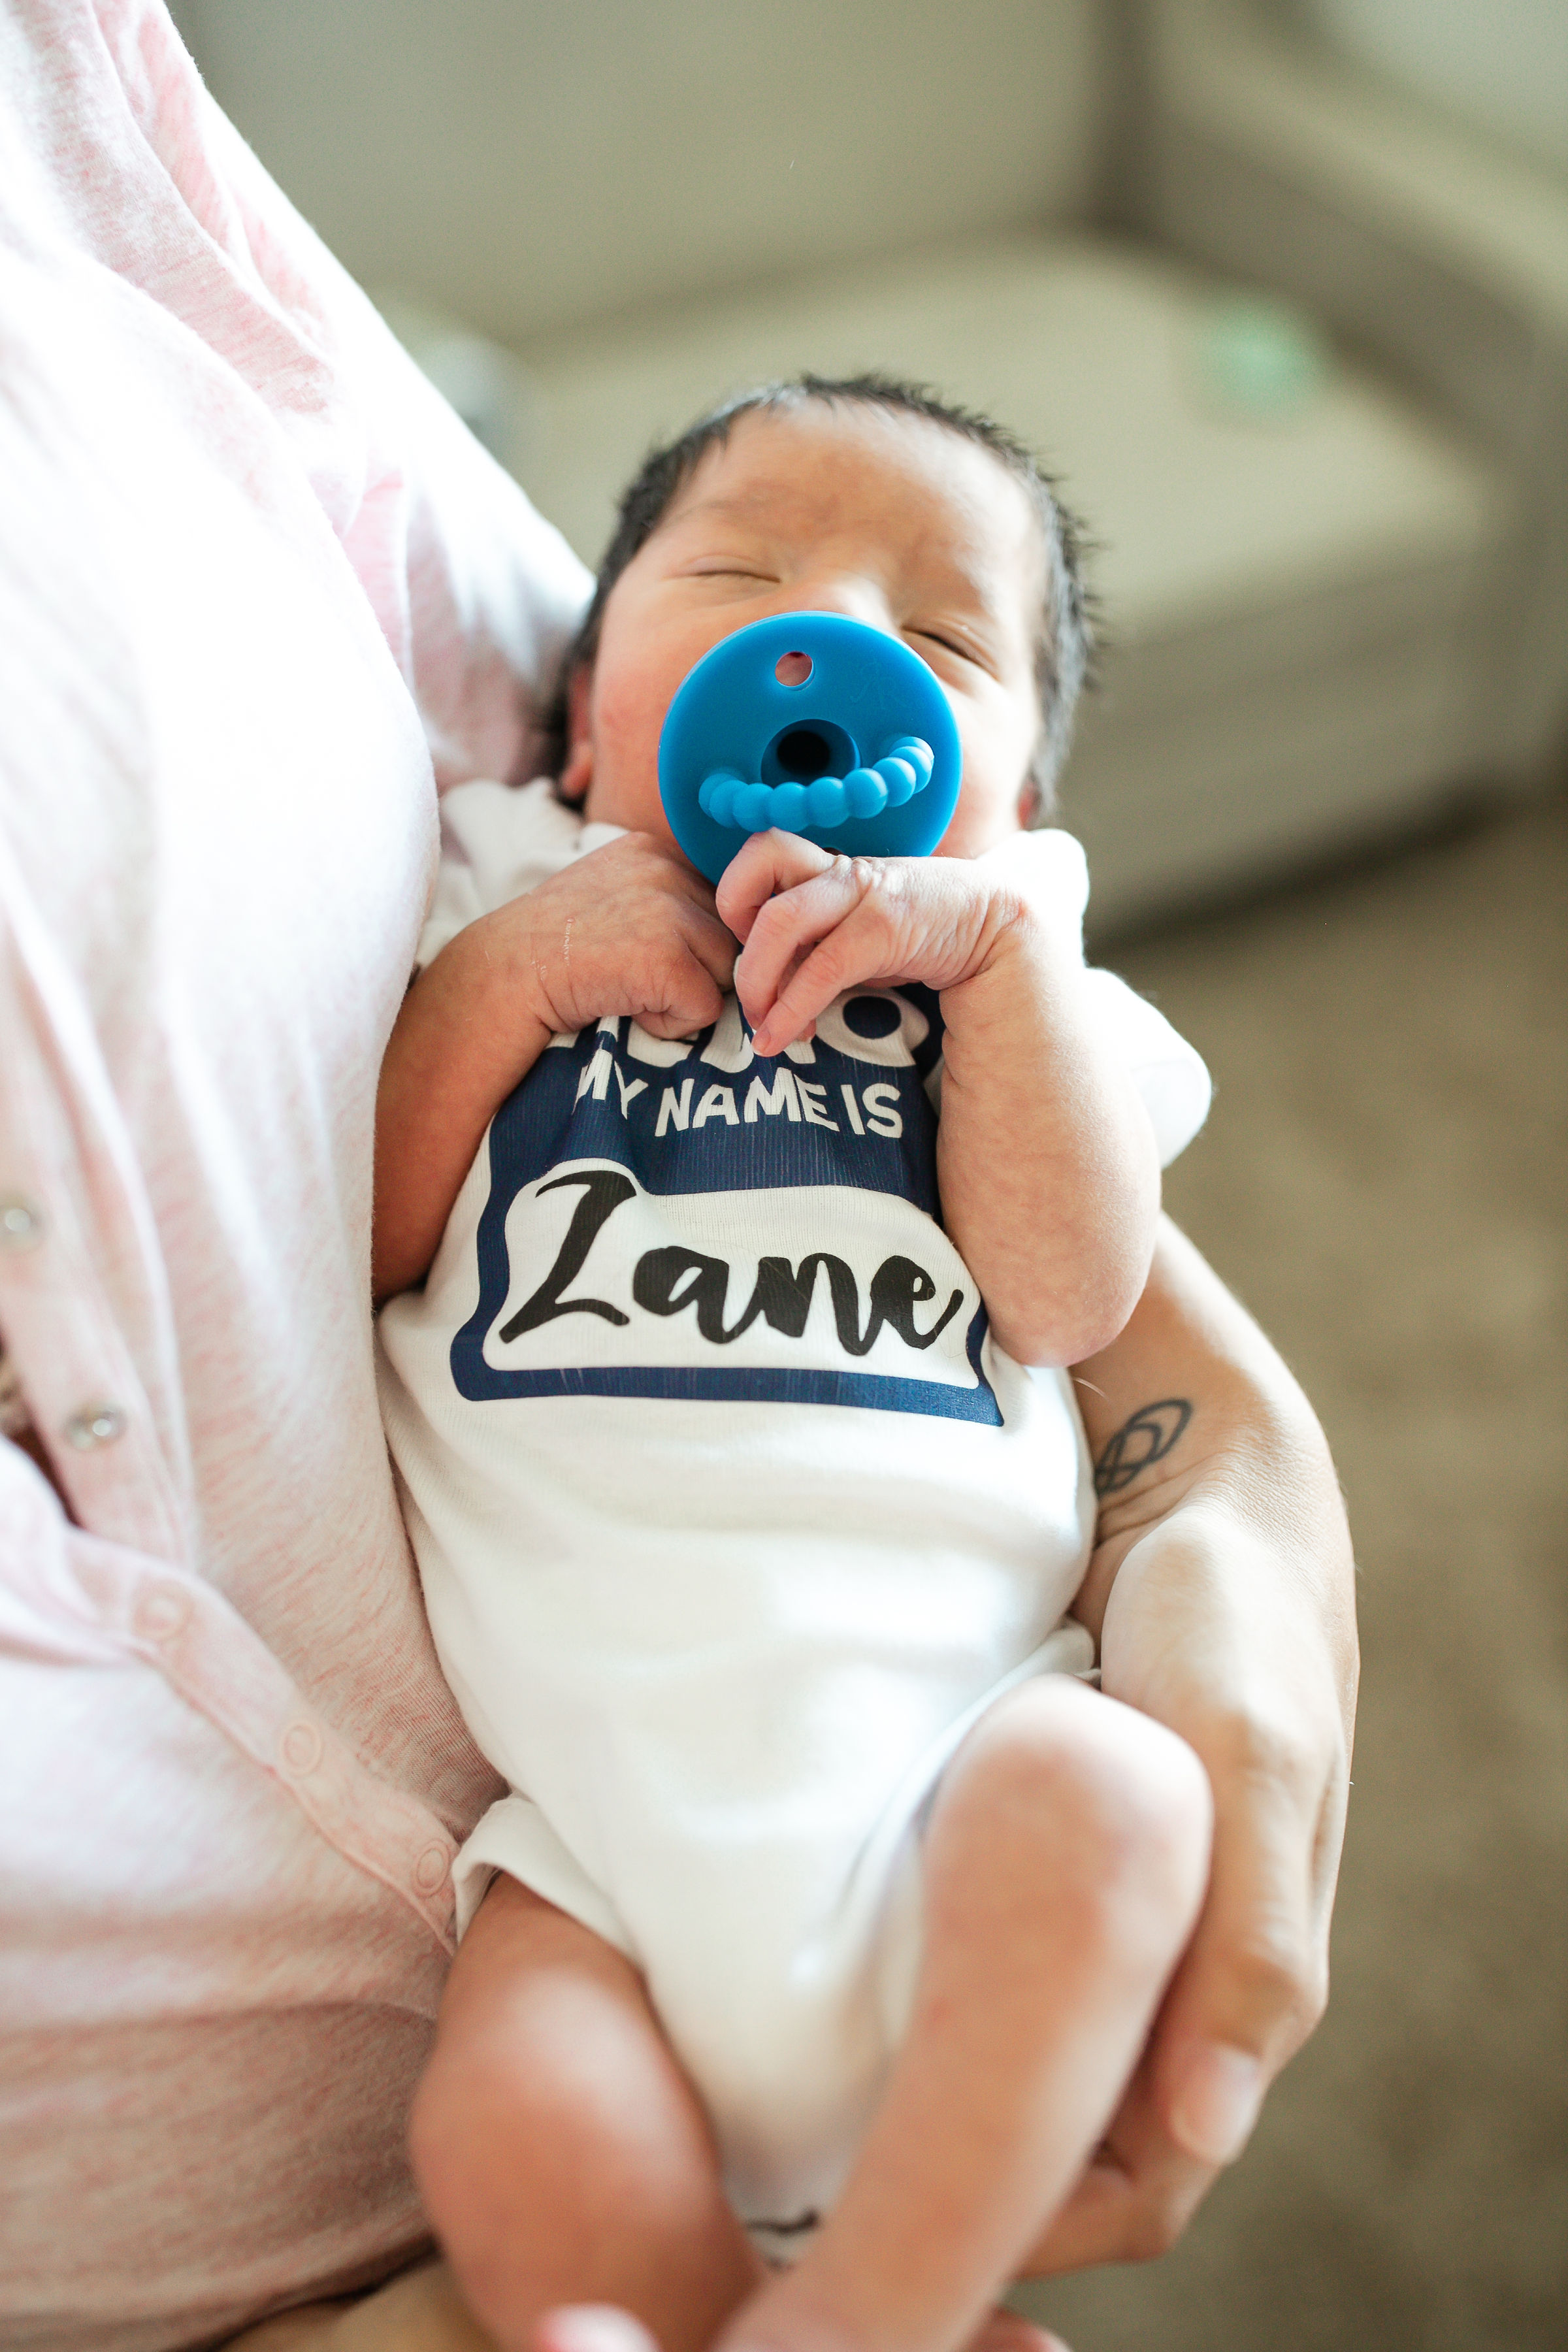 Personalized Newborn Baby Coming Home Hospital Outfit, Infant Name Outfit, Baby Clothes